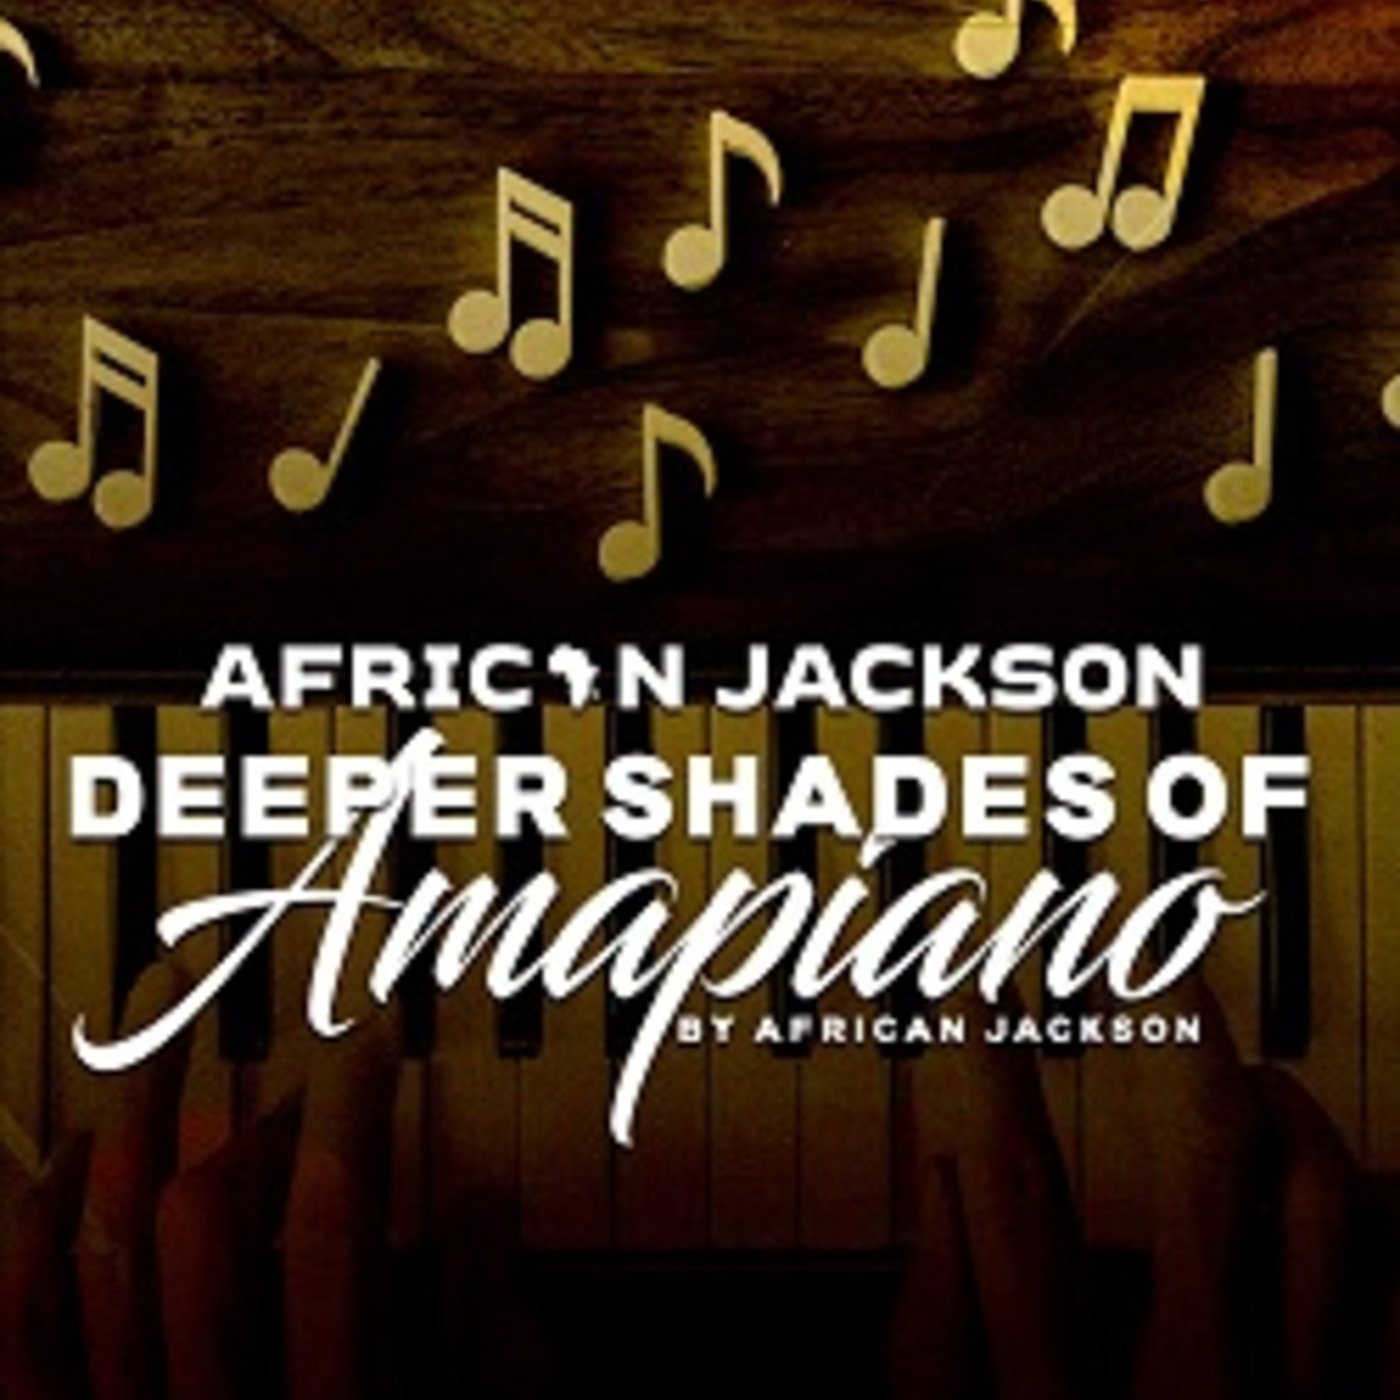 Deeper Shades Of Amapiano by African Jackson